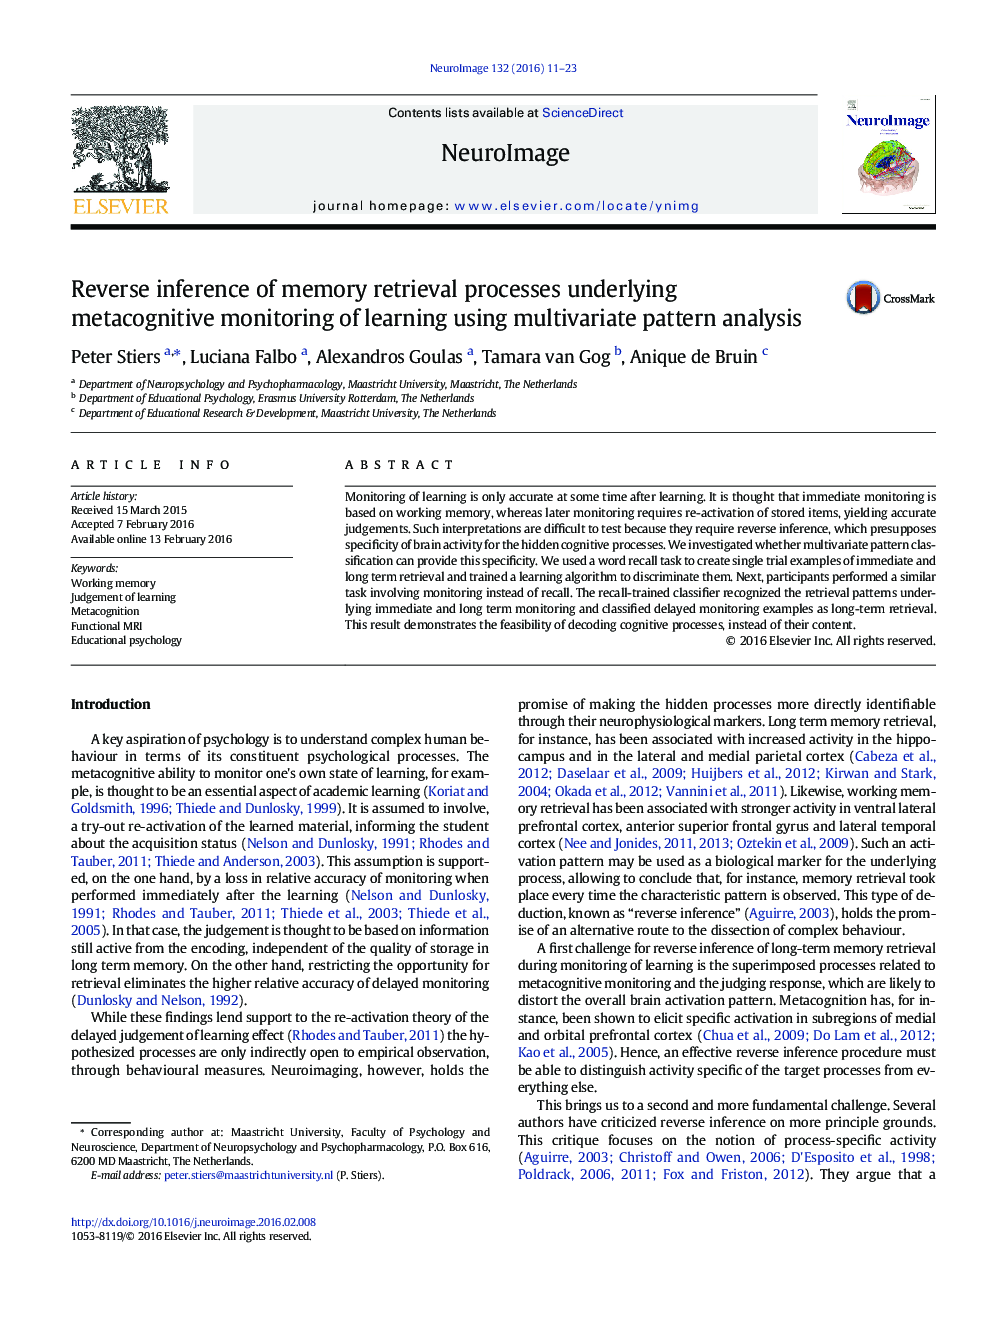 Reverse inference of memory retrieval processes underlying metacognitive monitoring of learning using multivariate pattern analysis